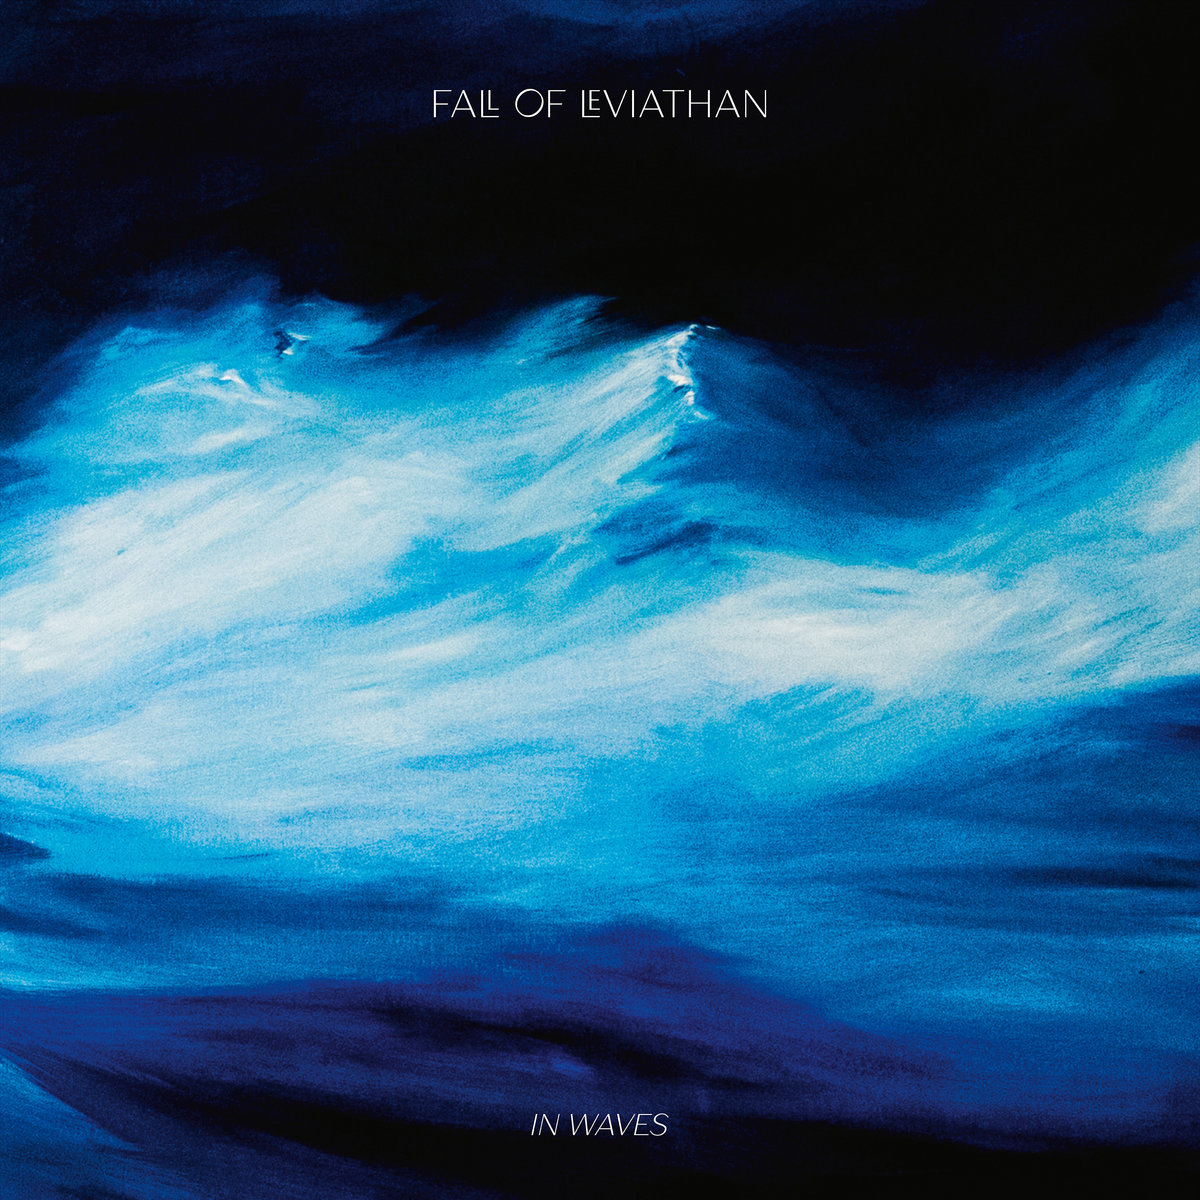 Fall of Leviathan: In Waves